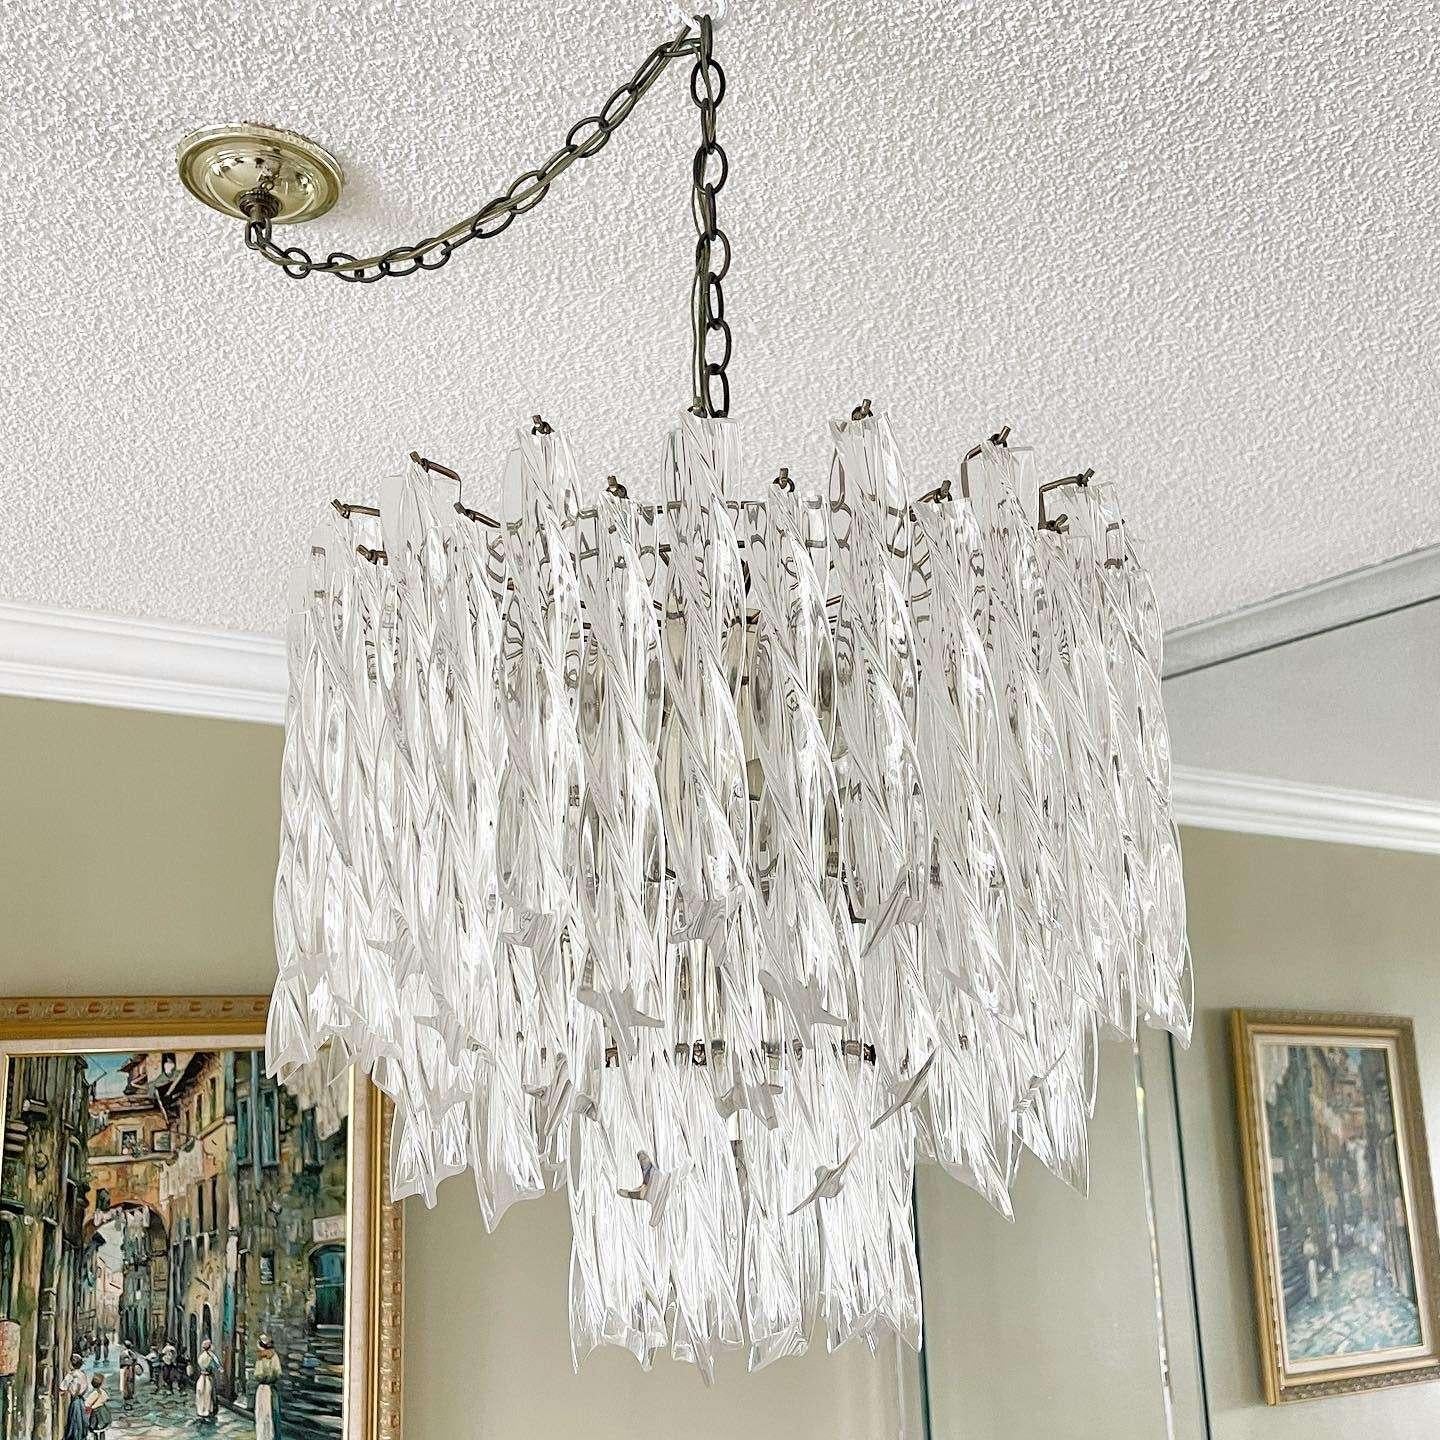 Exceptional vintage art deco revival lucite chandelier. Features a twisted lucite pendants hanging grime three tiers. Has 13 lights.
Chain length:
36”